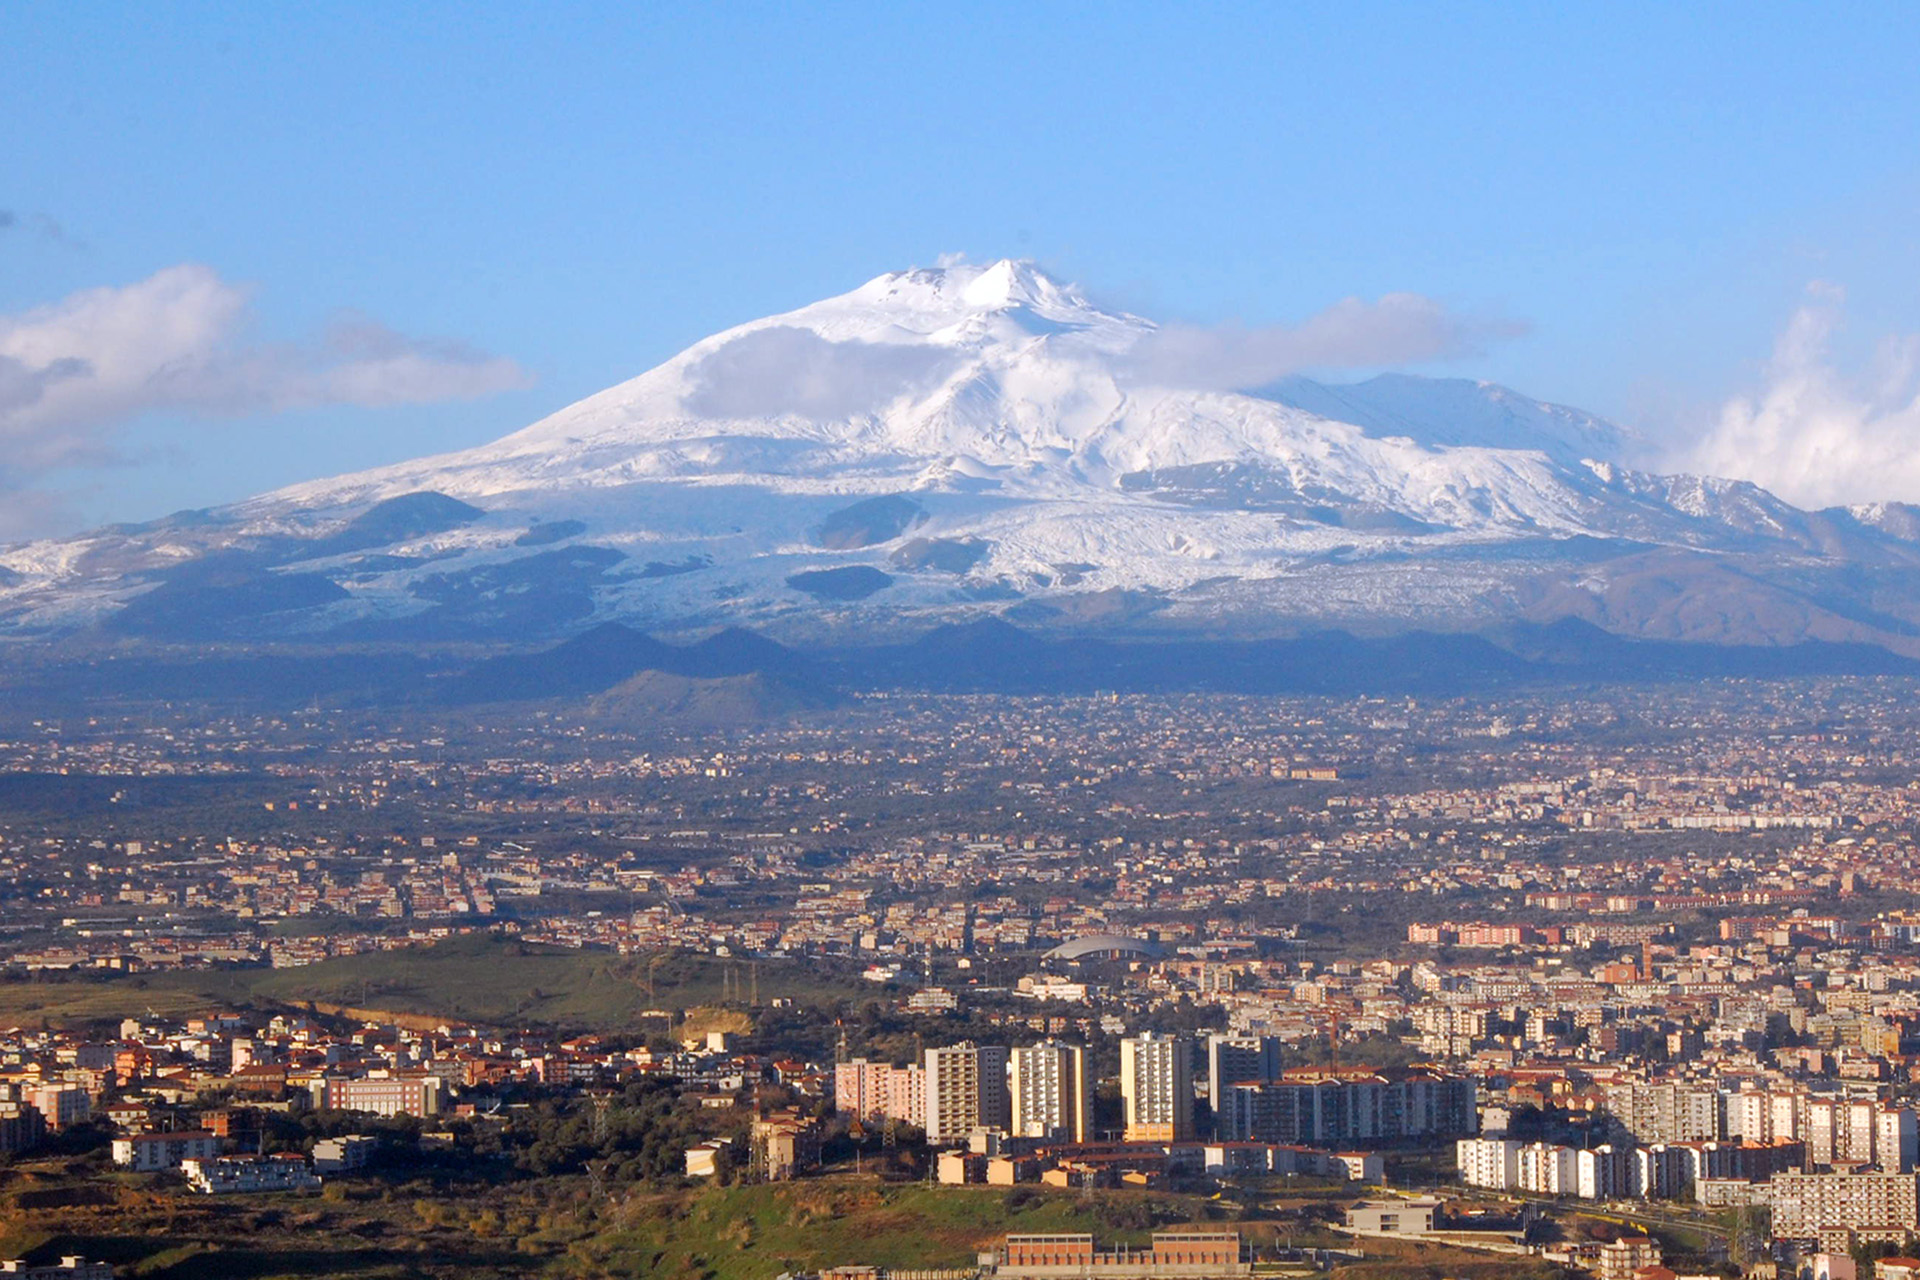 Etna with Catania in the foreground